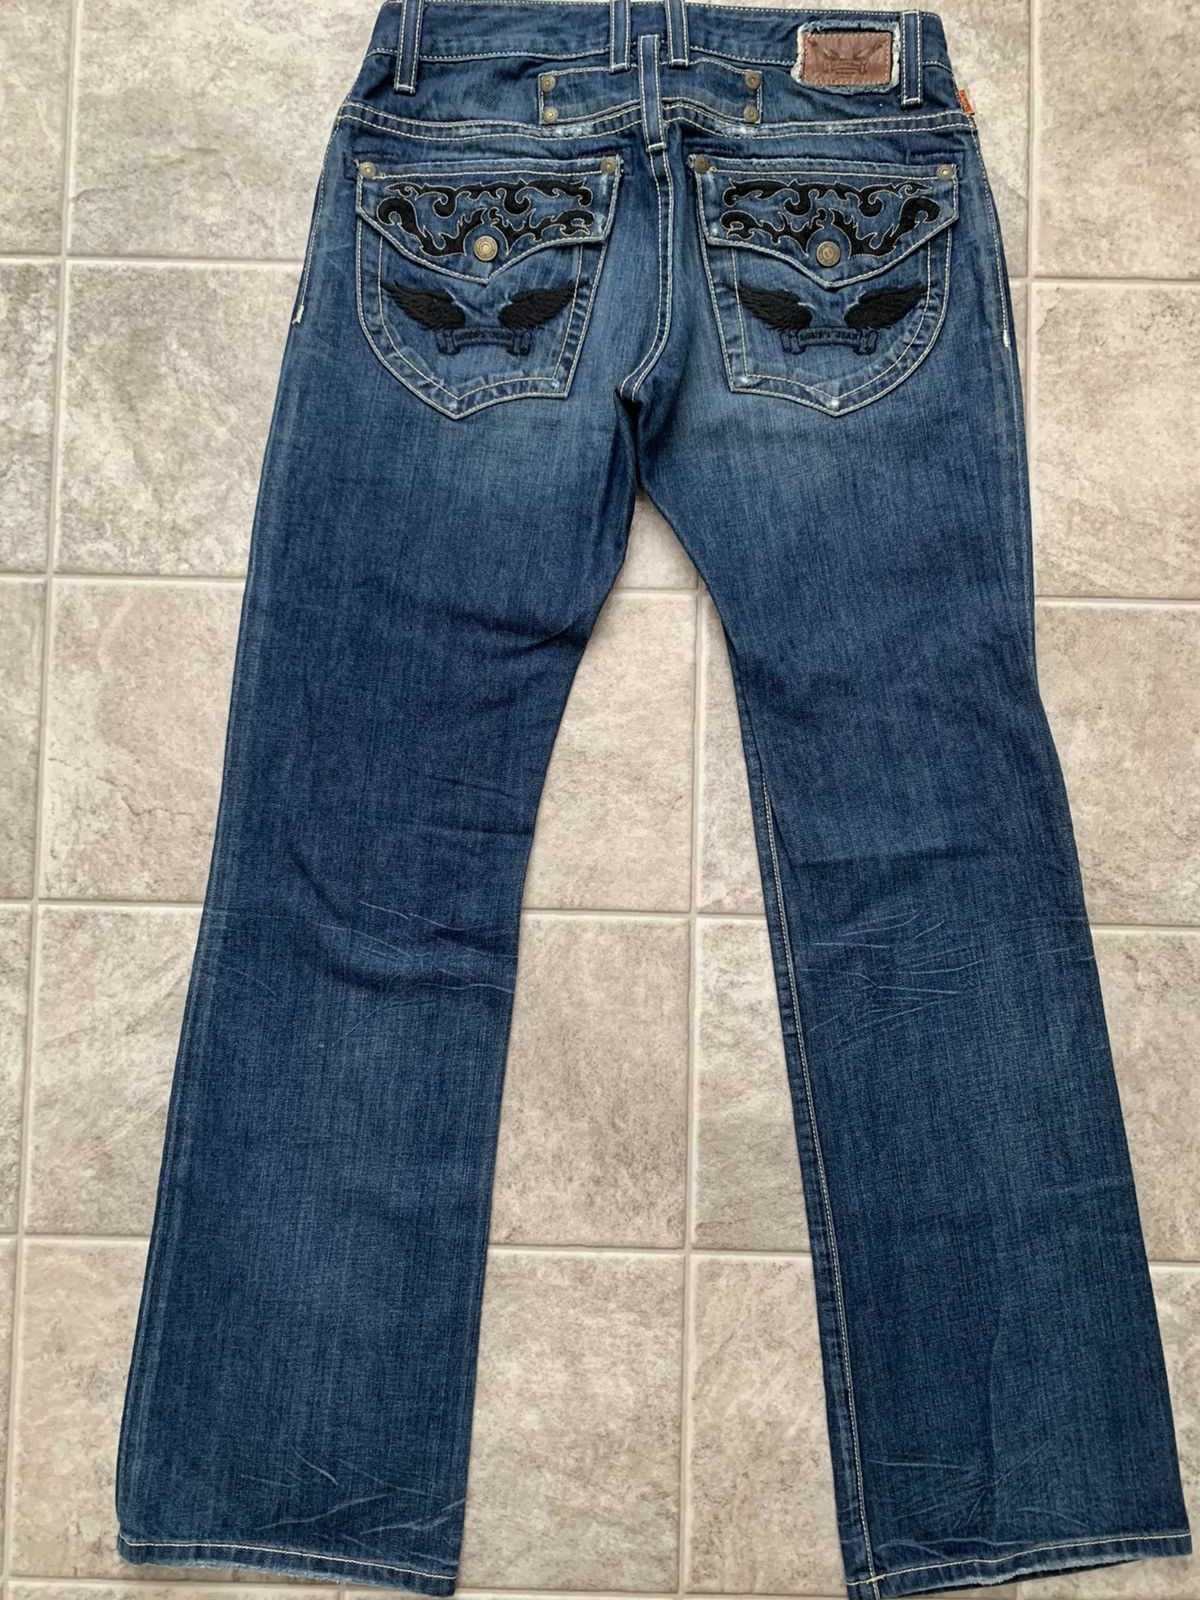 Robins Jeans Robins Jean ‘Black Wings’ Jeans Size US 32 / EU 48 - 2 Preview